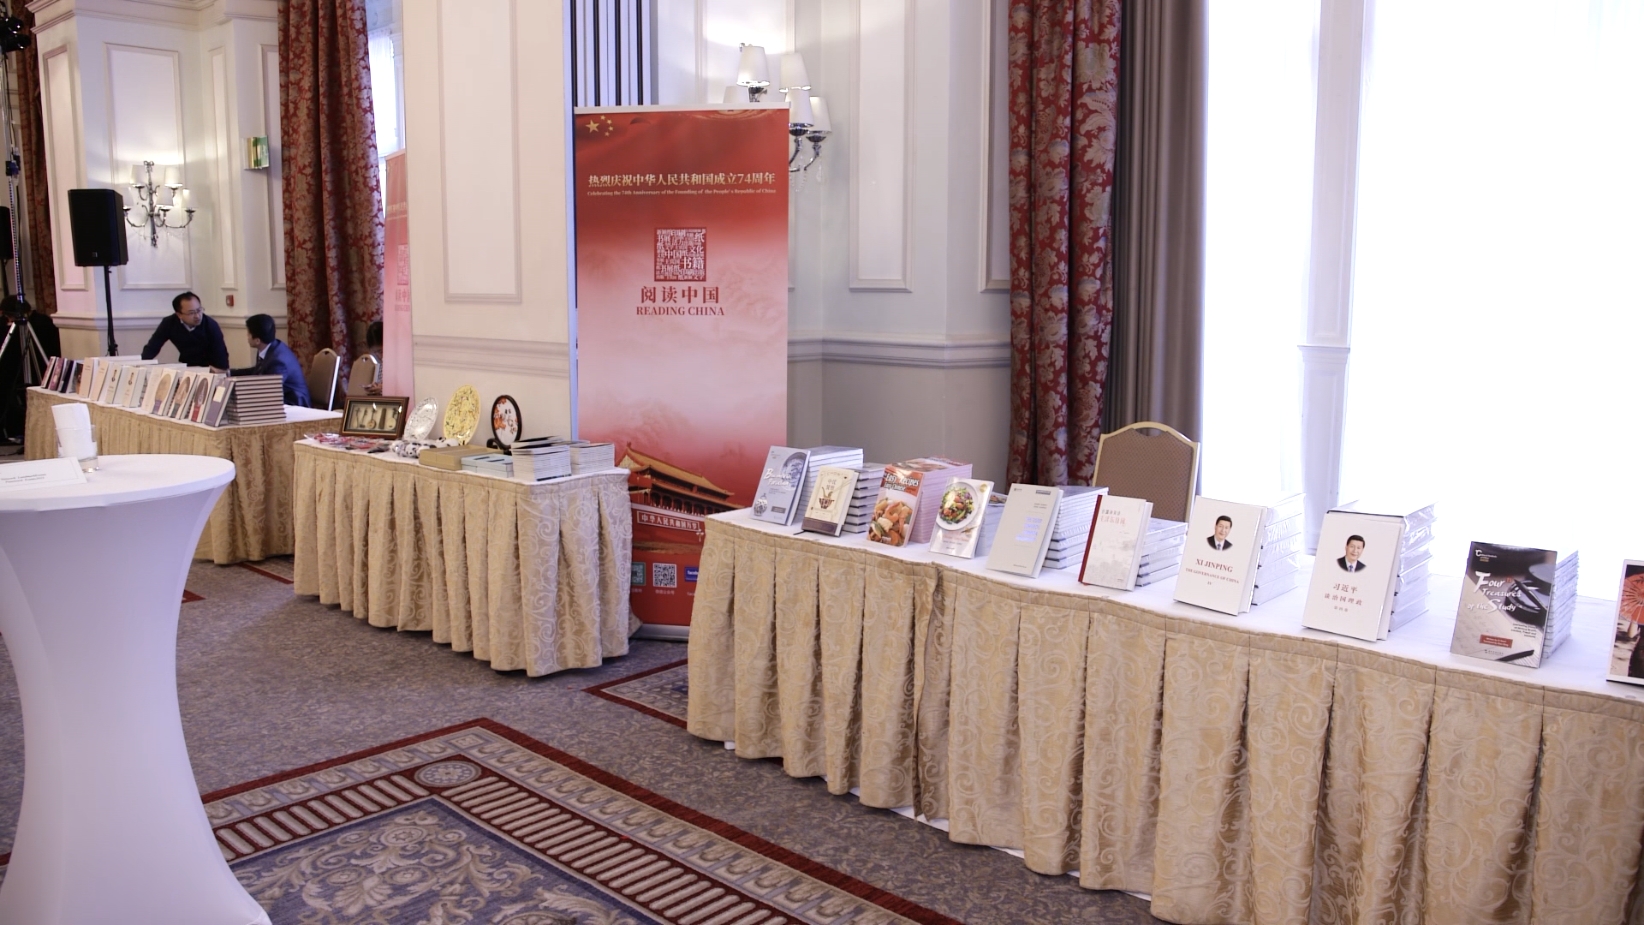 Books introduced Chinese cultures at the reception. /CGTN Europe